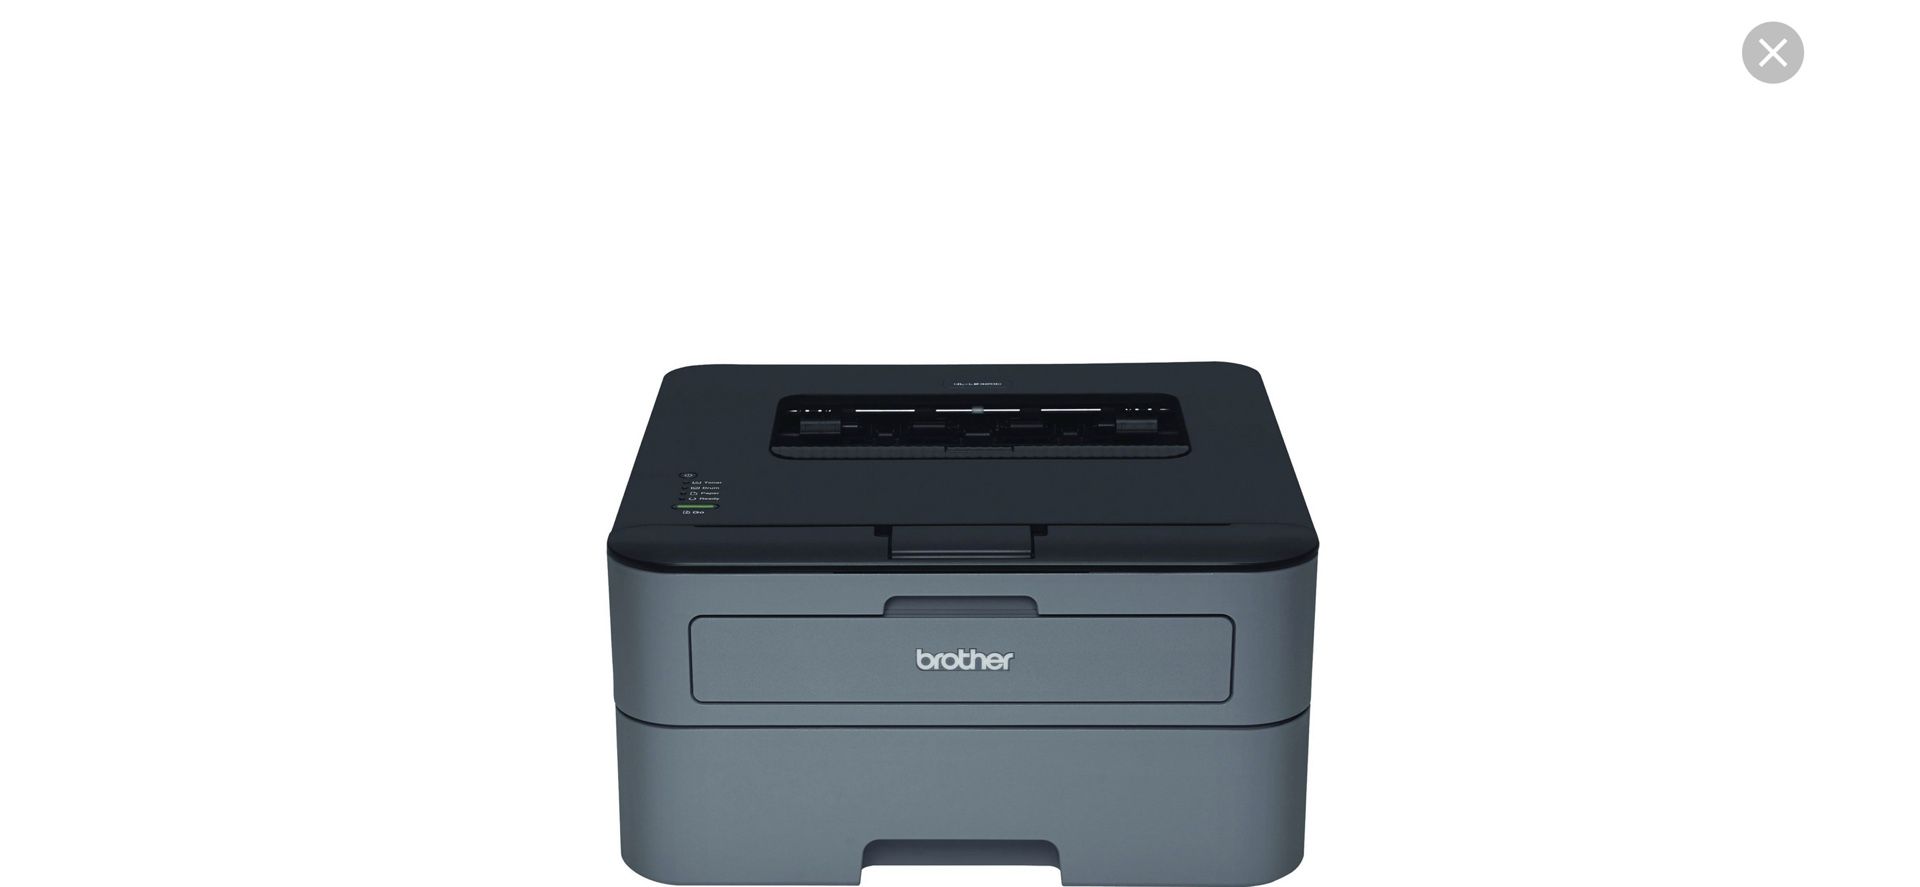 Compact, Personal Laser Printer with Duplex